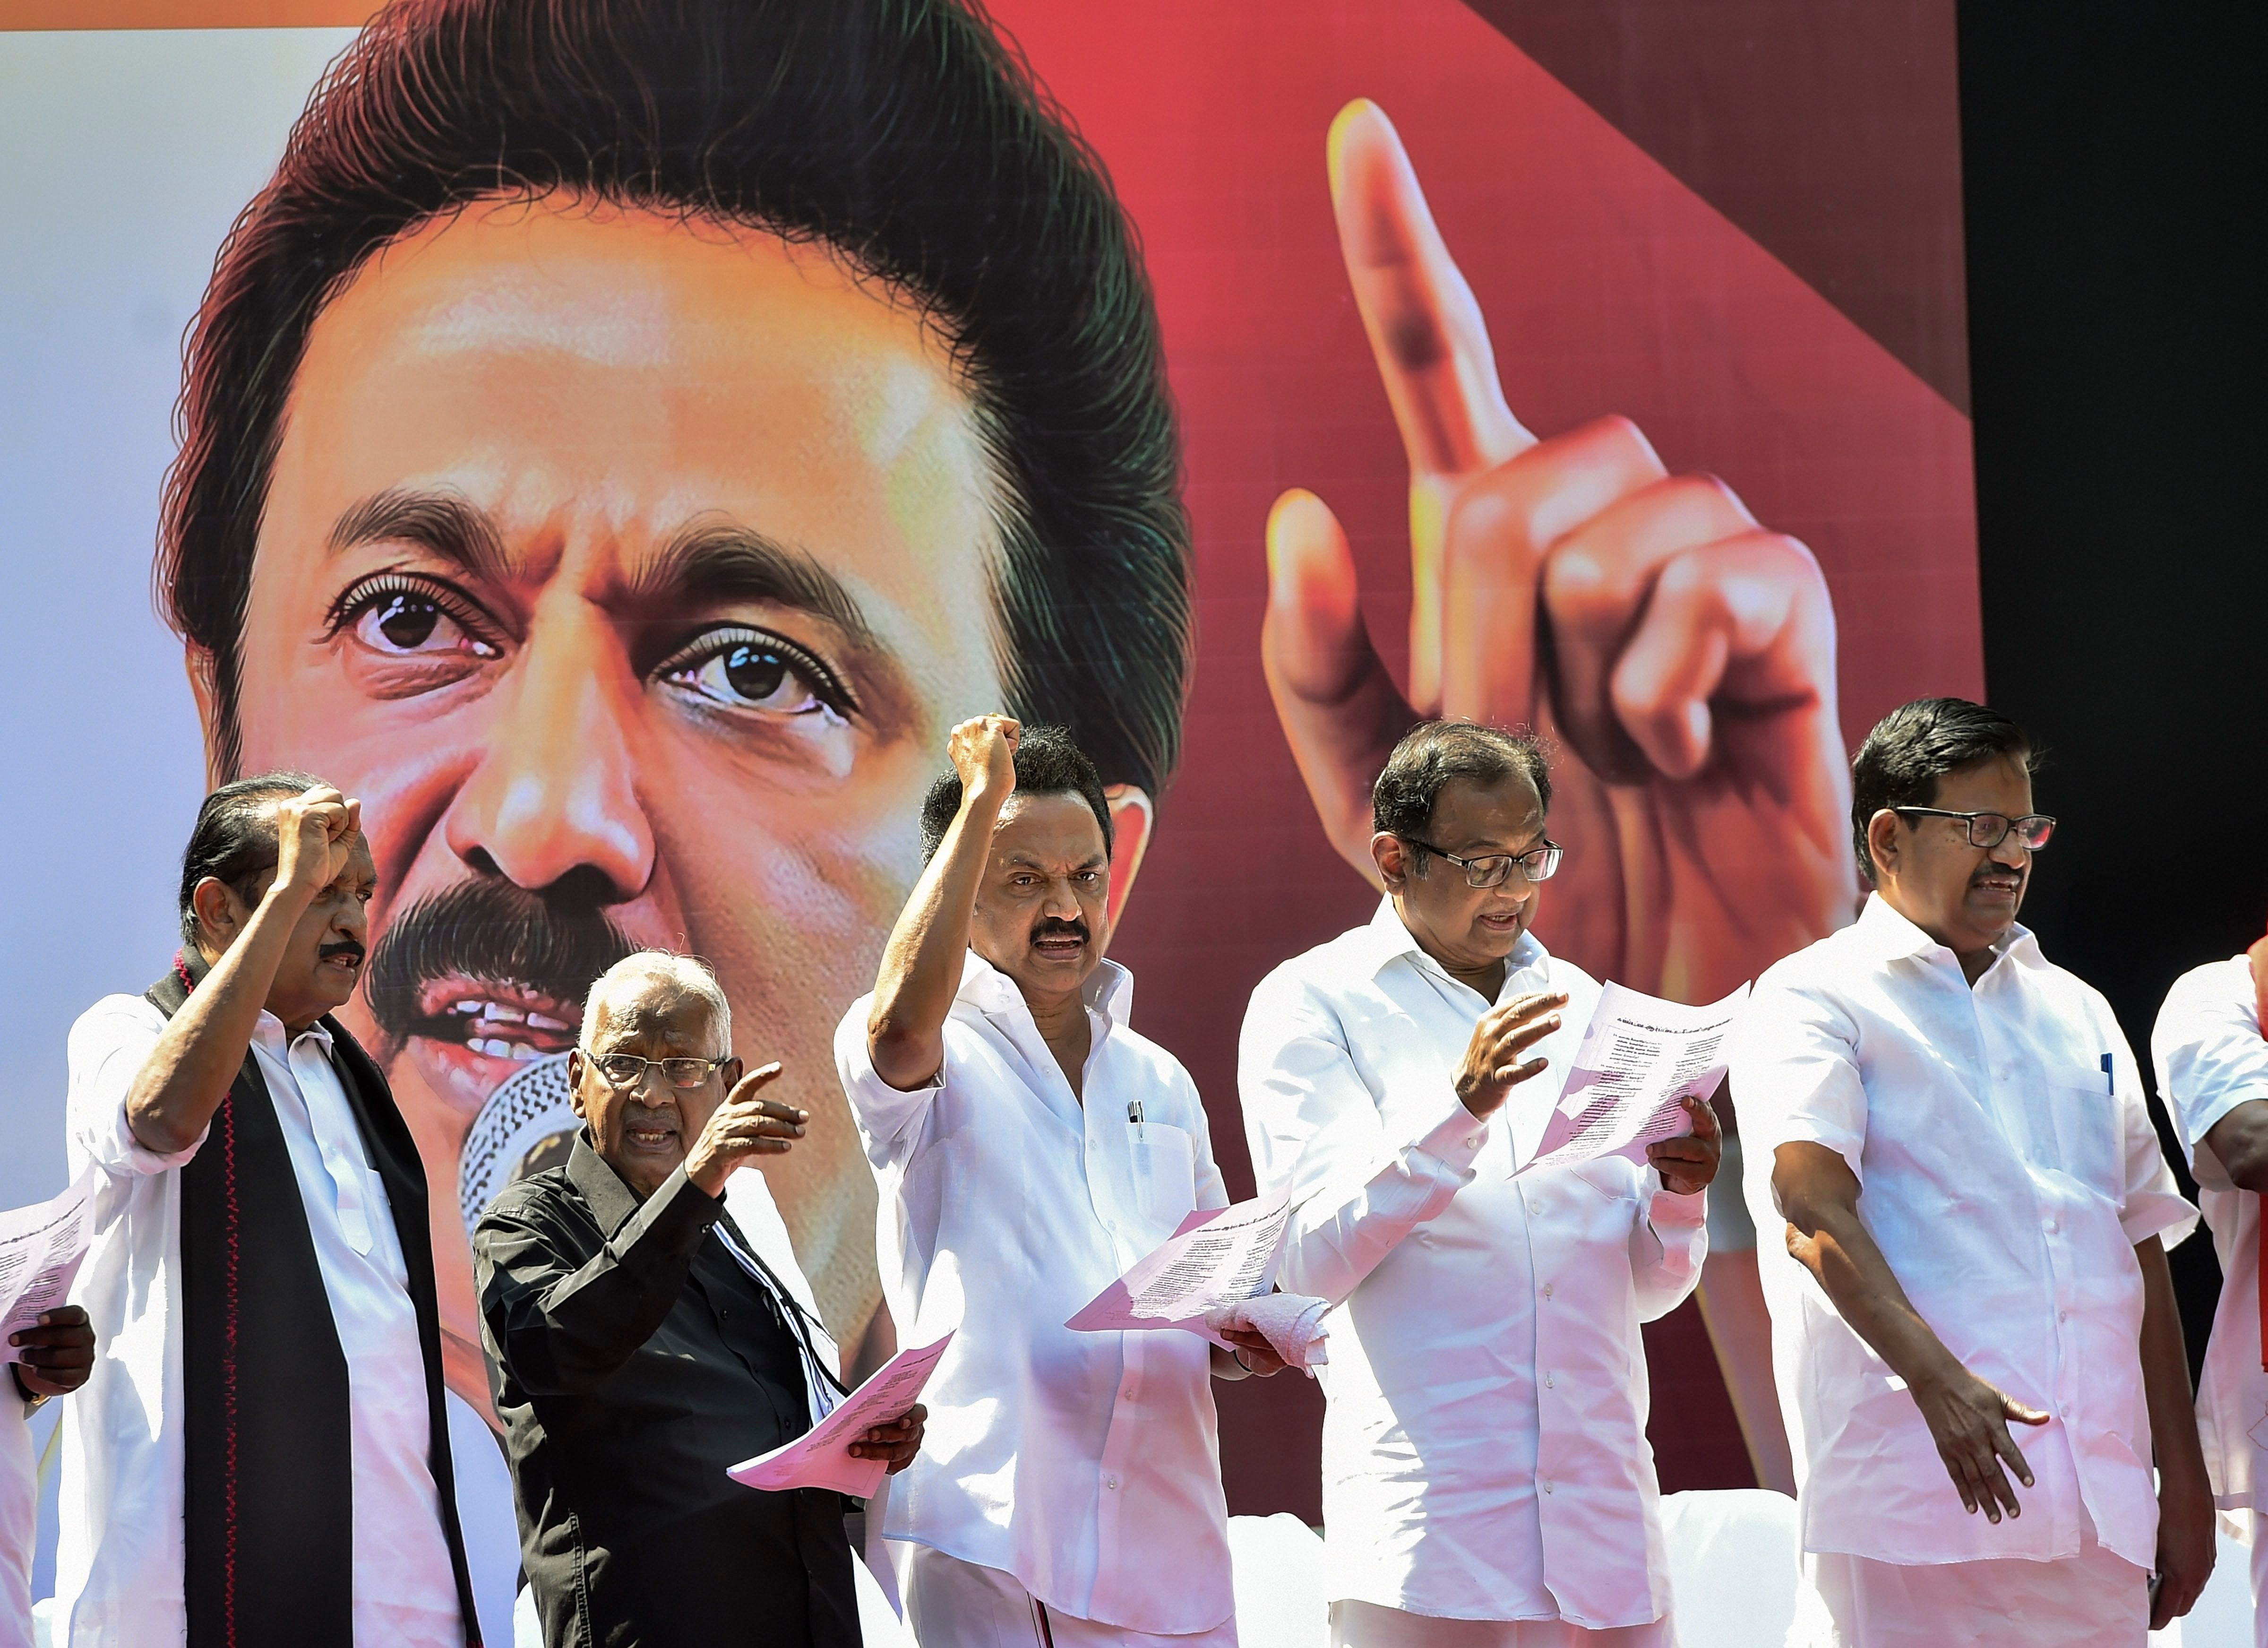 DMK president MK Stalin along with leaders of allies, including senior Congress leader P Chidambaram, MDMK chief Vaiko and state unit leaders of the Left parties take part in a protest rally against the Citizenship (Amendment) Act (CAA), in Chennai. (PTI Photo)